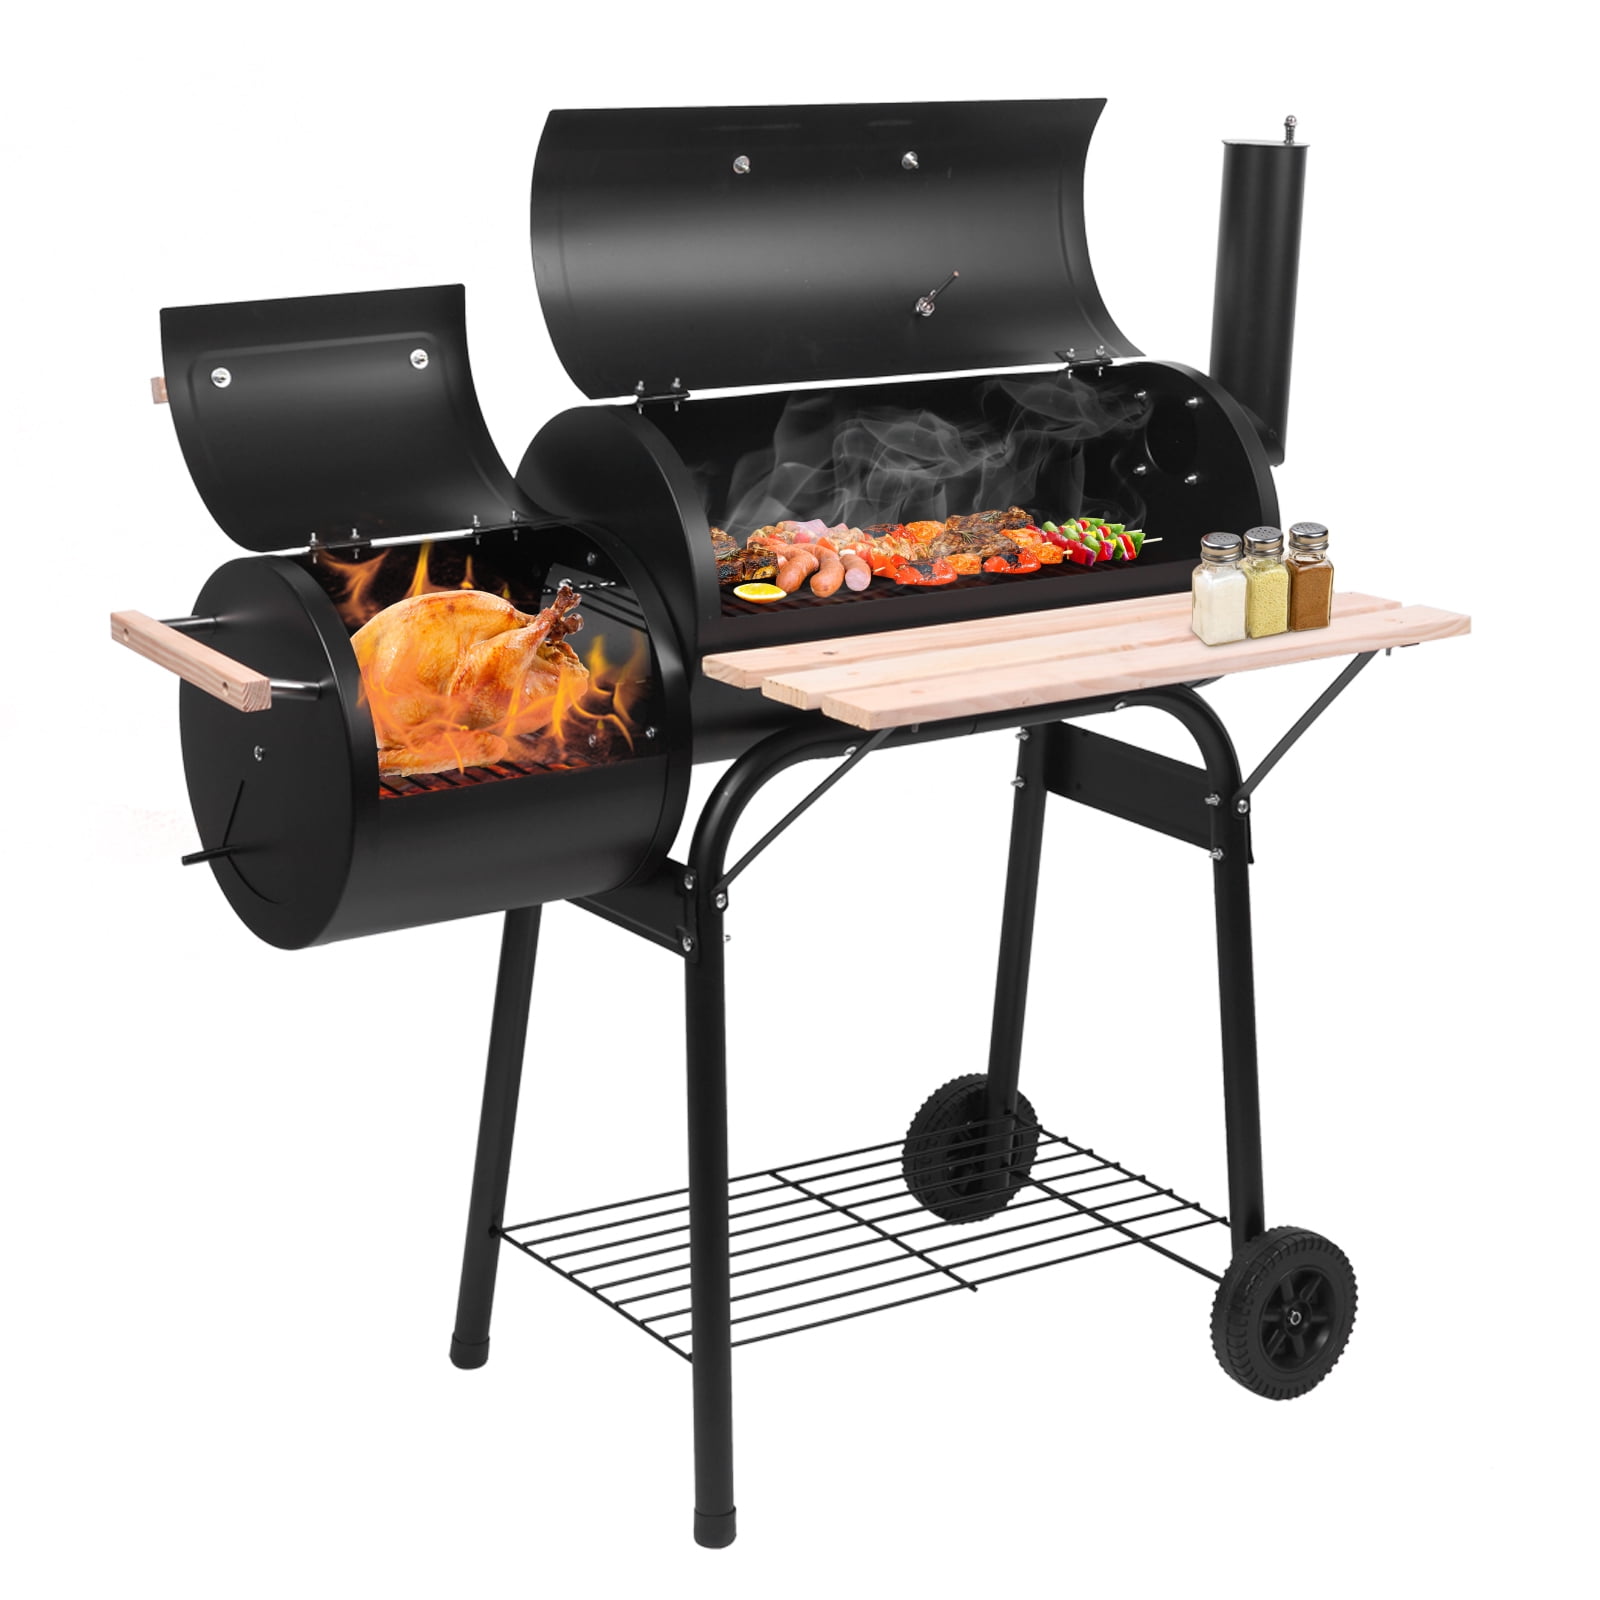 Zimtown BBQ Charcoal Grill Outdoor Barbecue Pit with Offset Smoker Patio Backyard Black - image 1 of 8